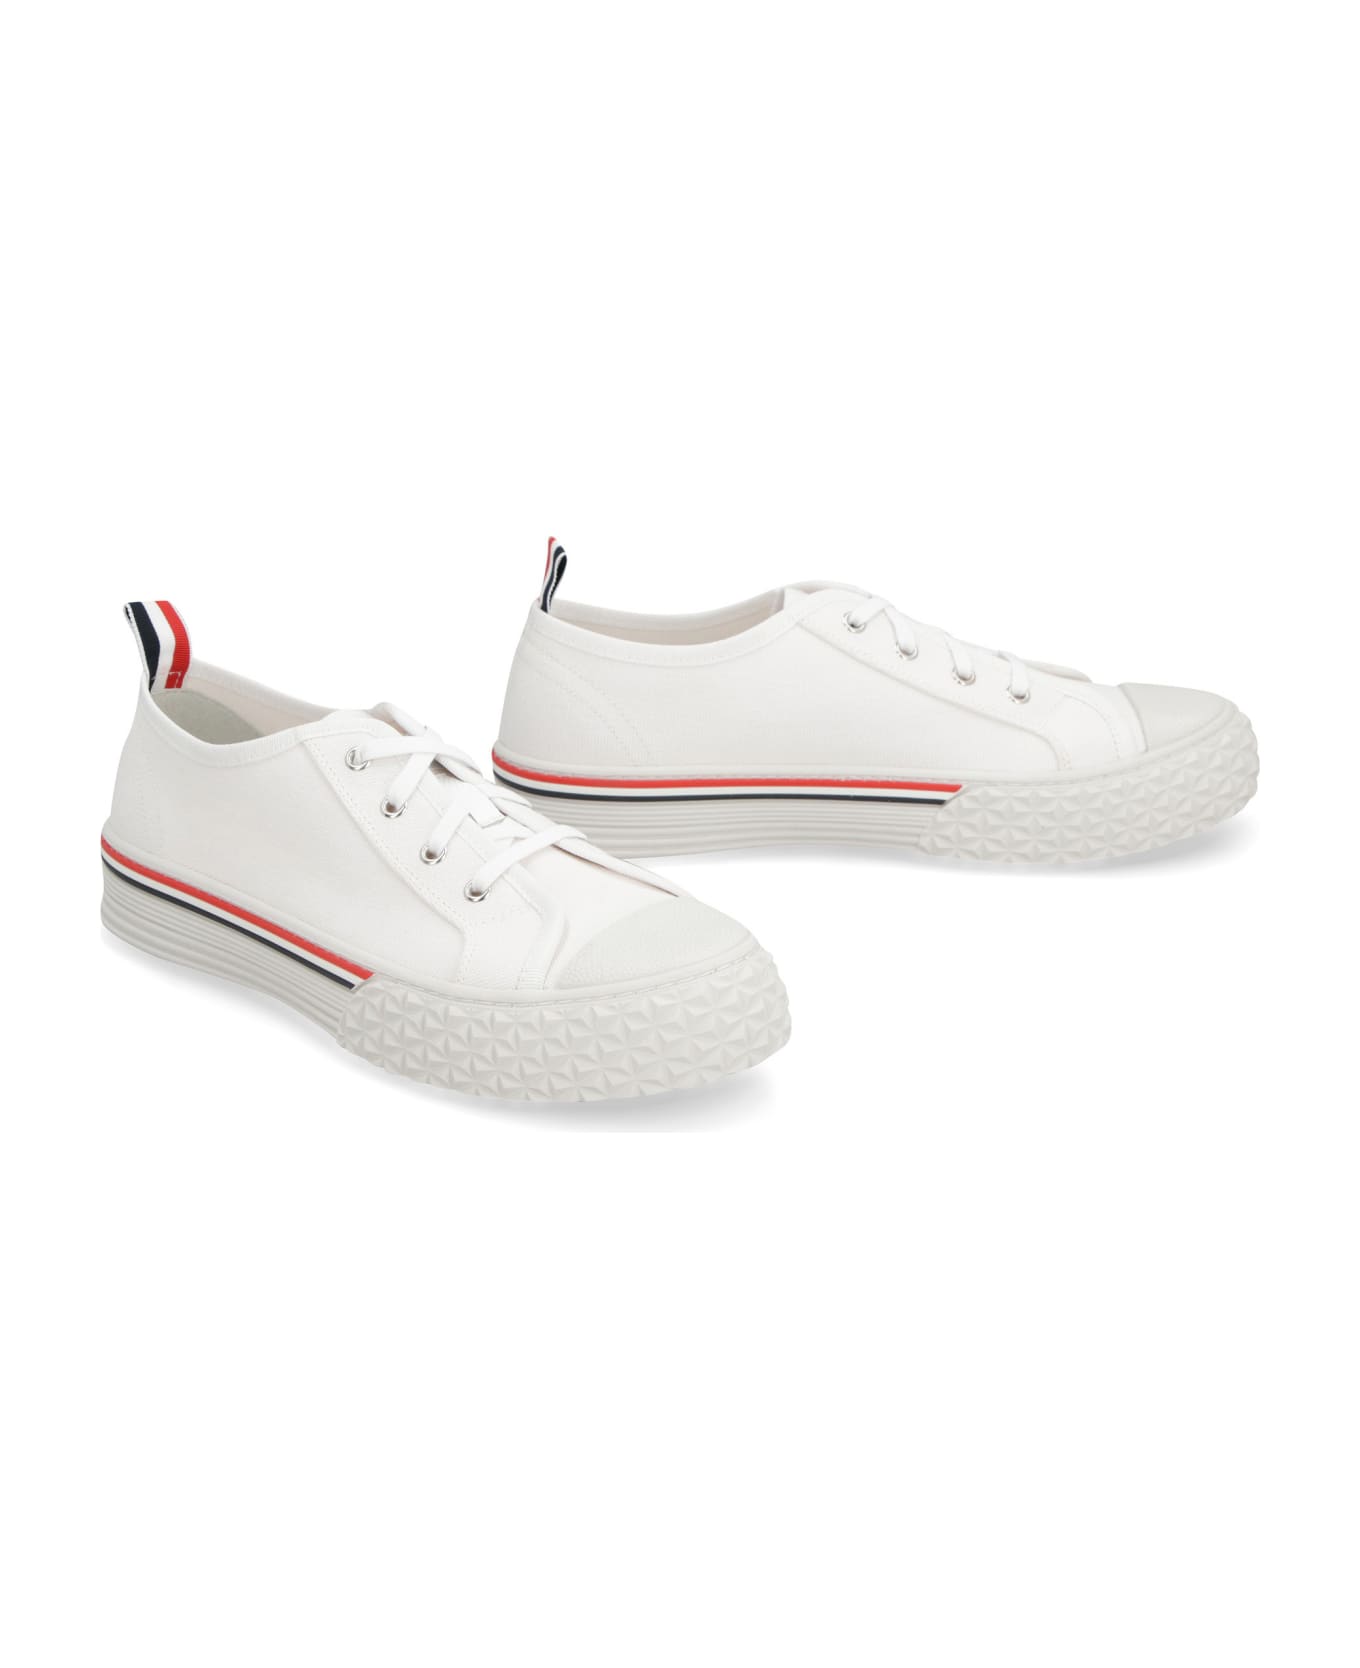 Thom Browne Collegiate Canvas Low-top Sneakers - White